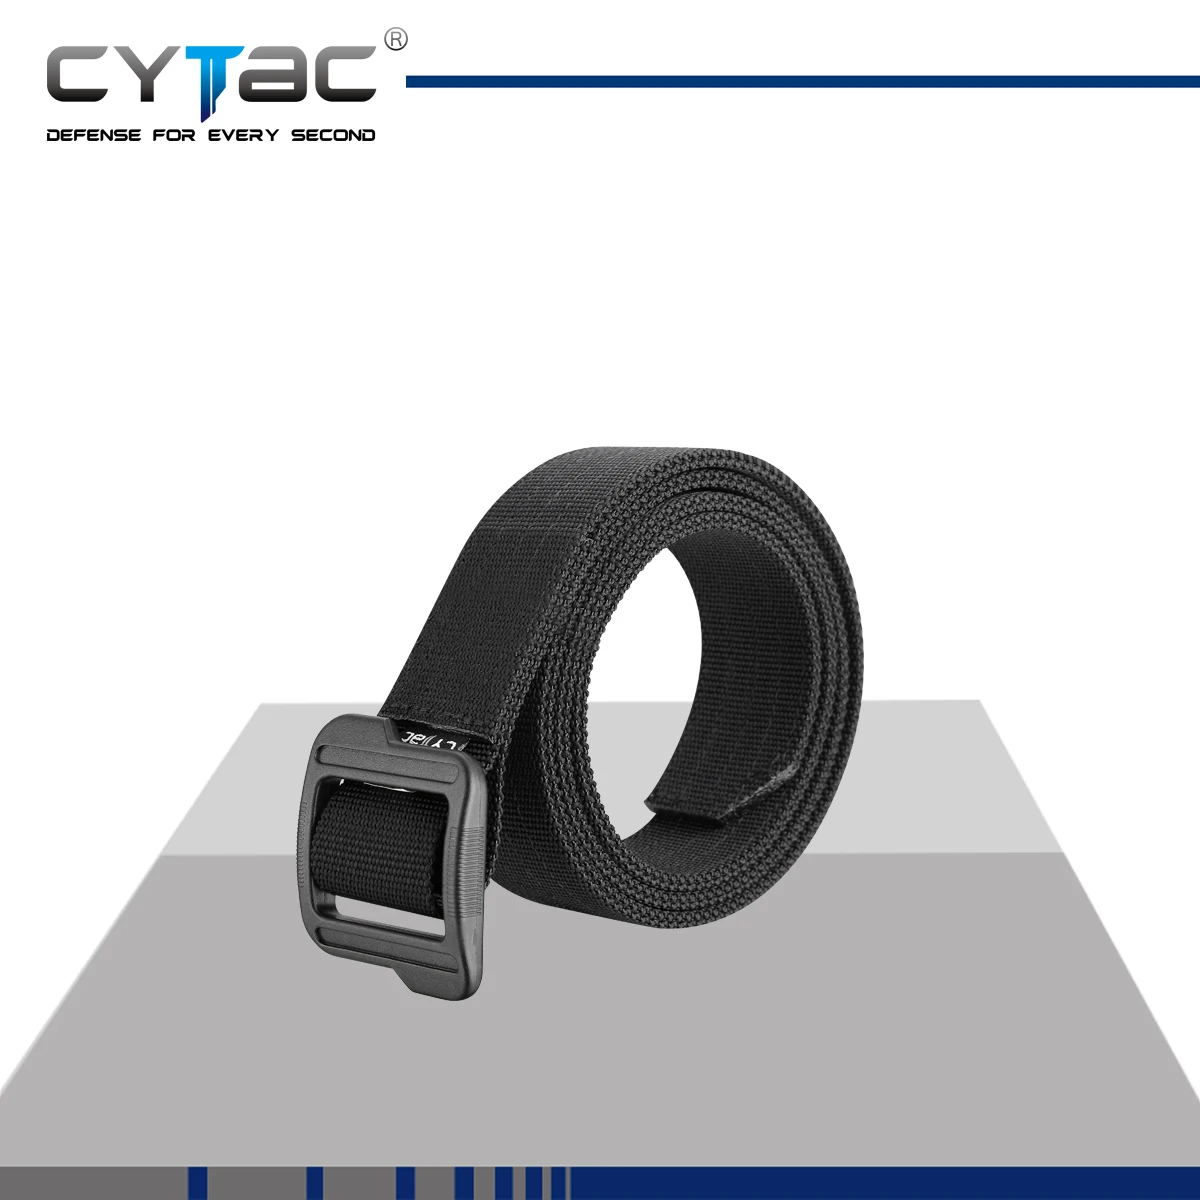 Cytac Tactical Belt Self Defense Products Double Layer 1.5